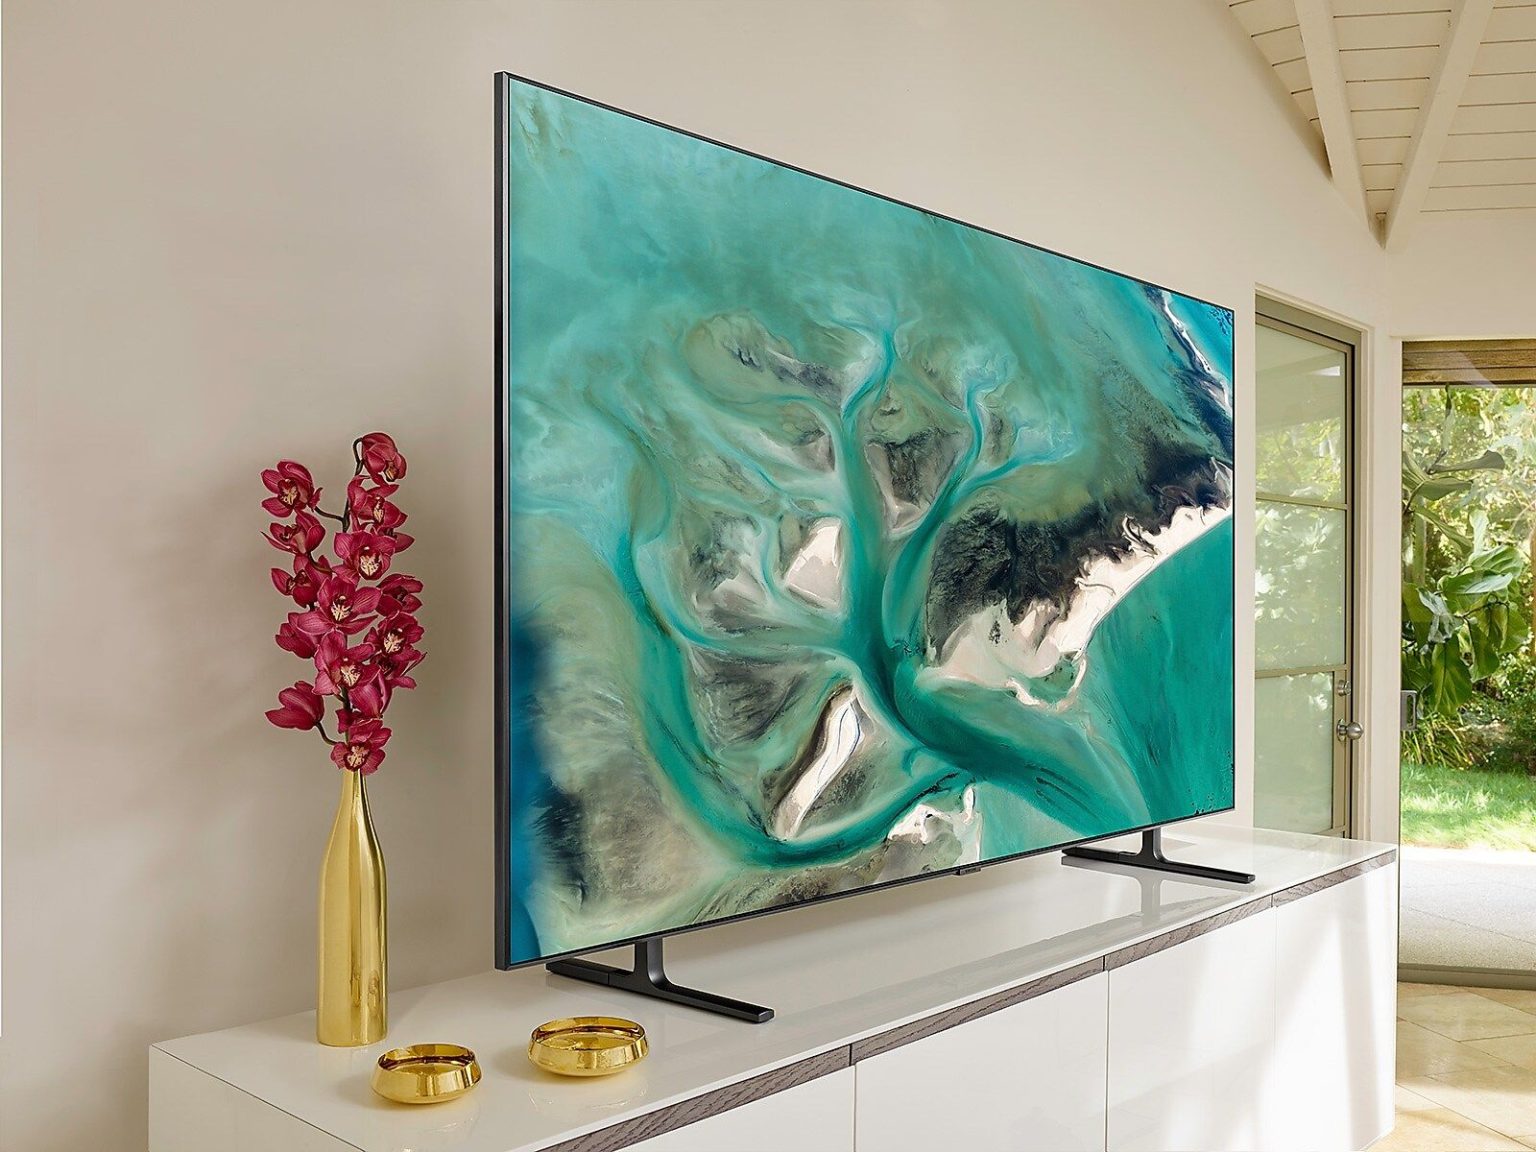 Samsung has new hybrid TVs coming — and they could kill OLED Tom's Guide